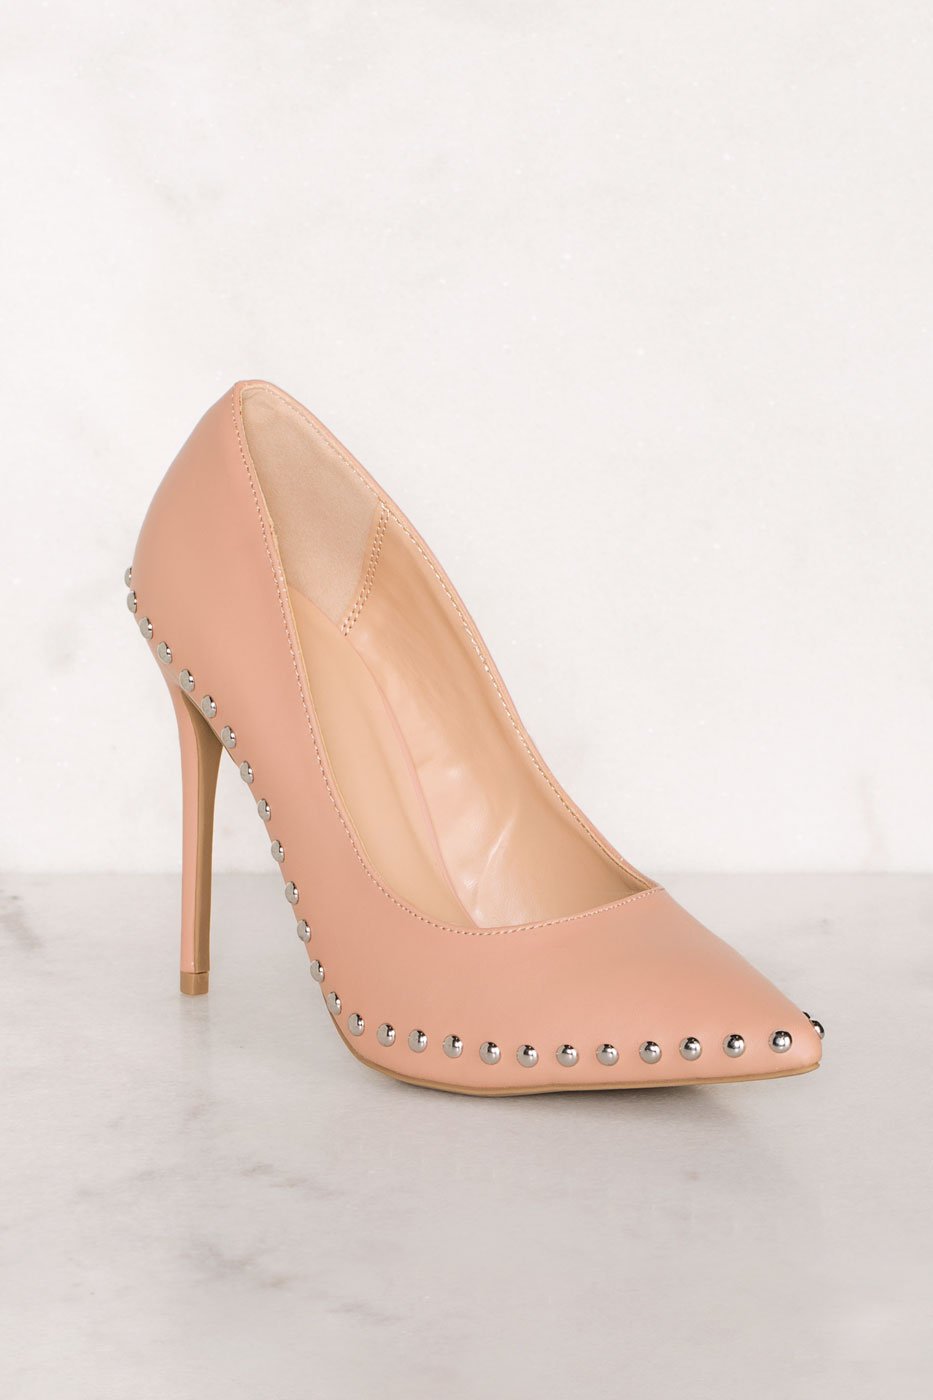 Covered pointy studded heels - ShopperBoard